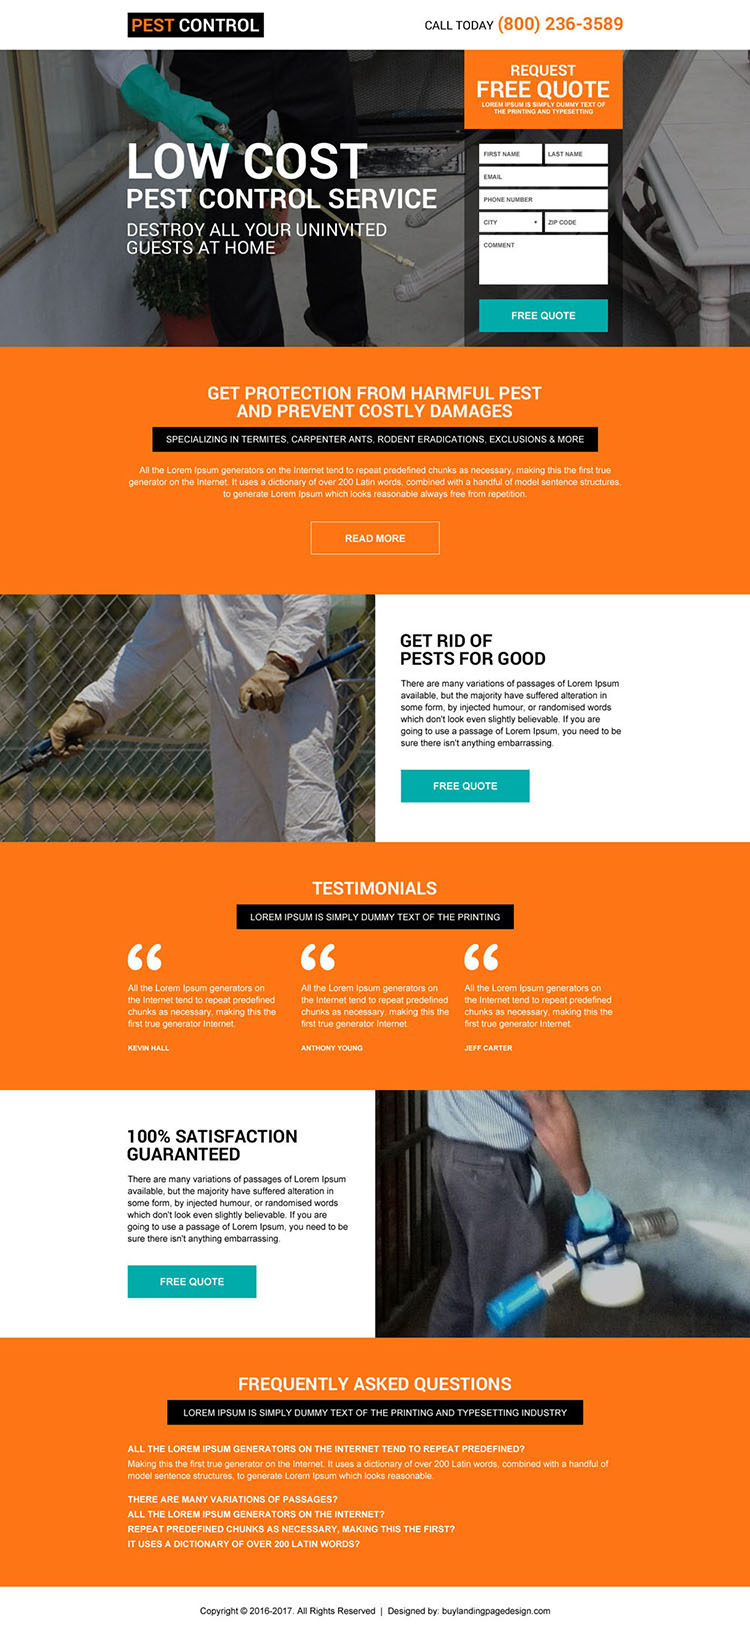 responsive residential pest control service lead capture landing page